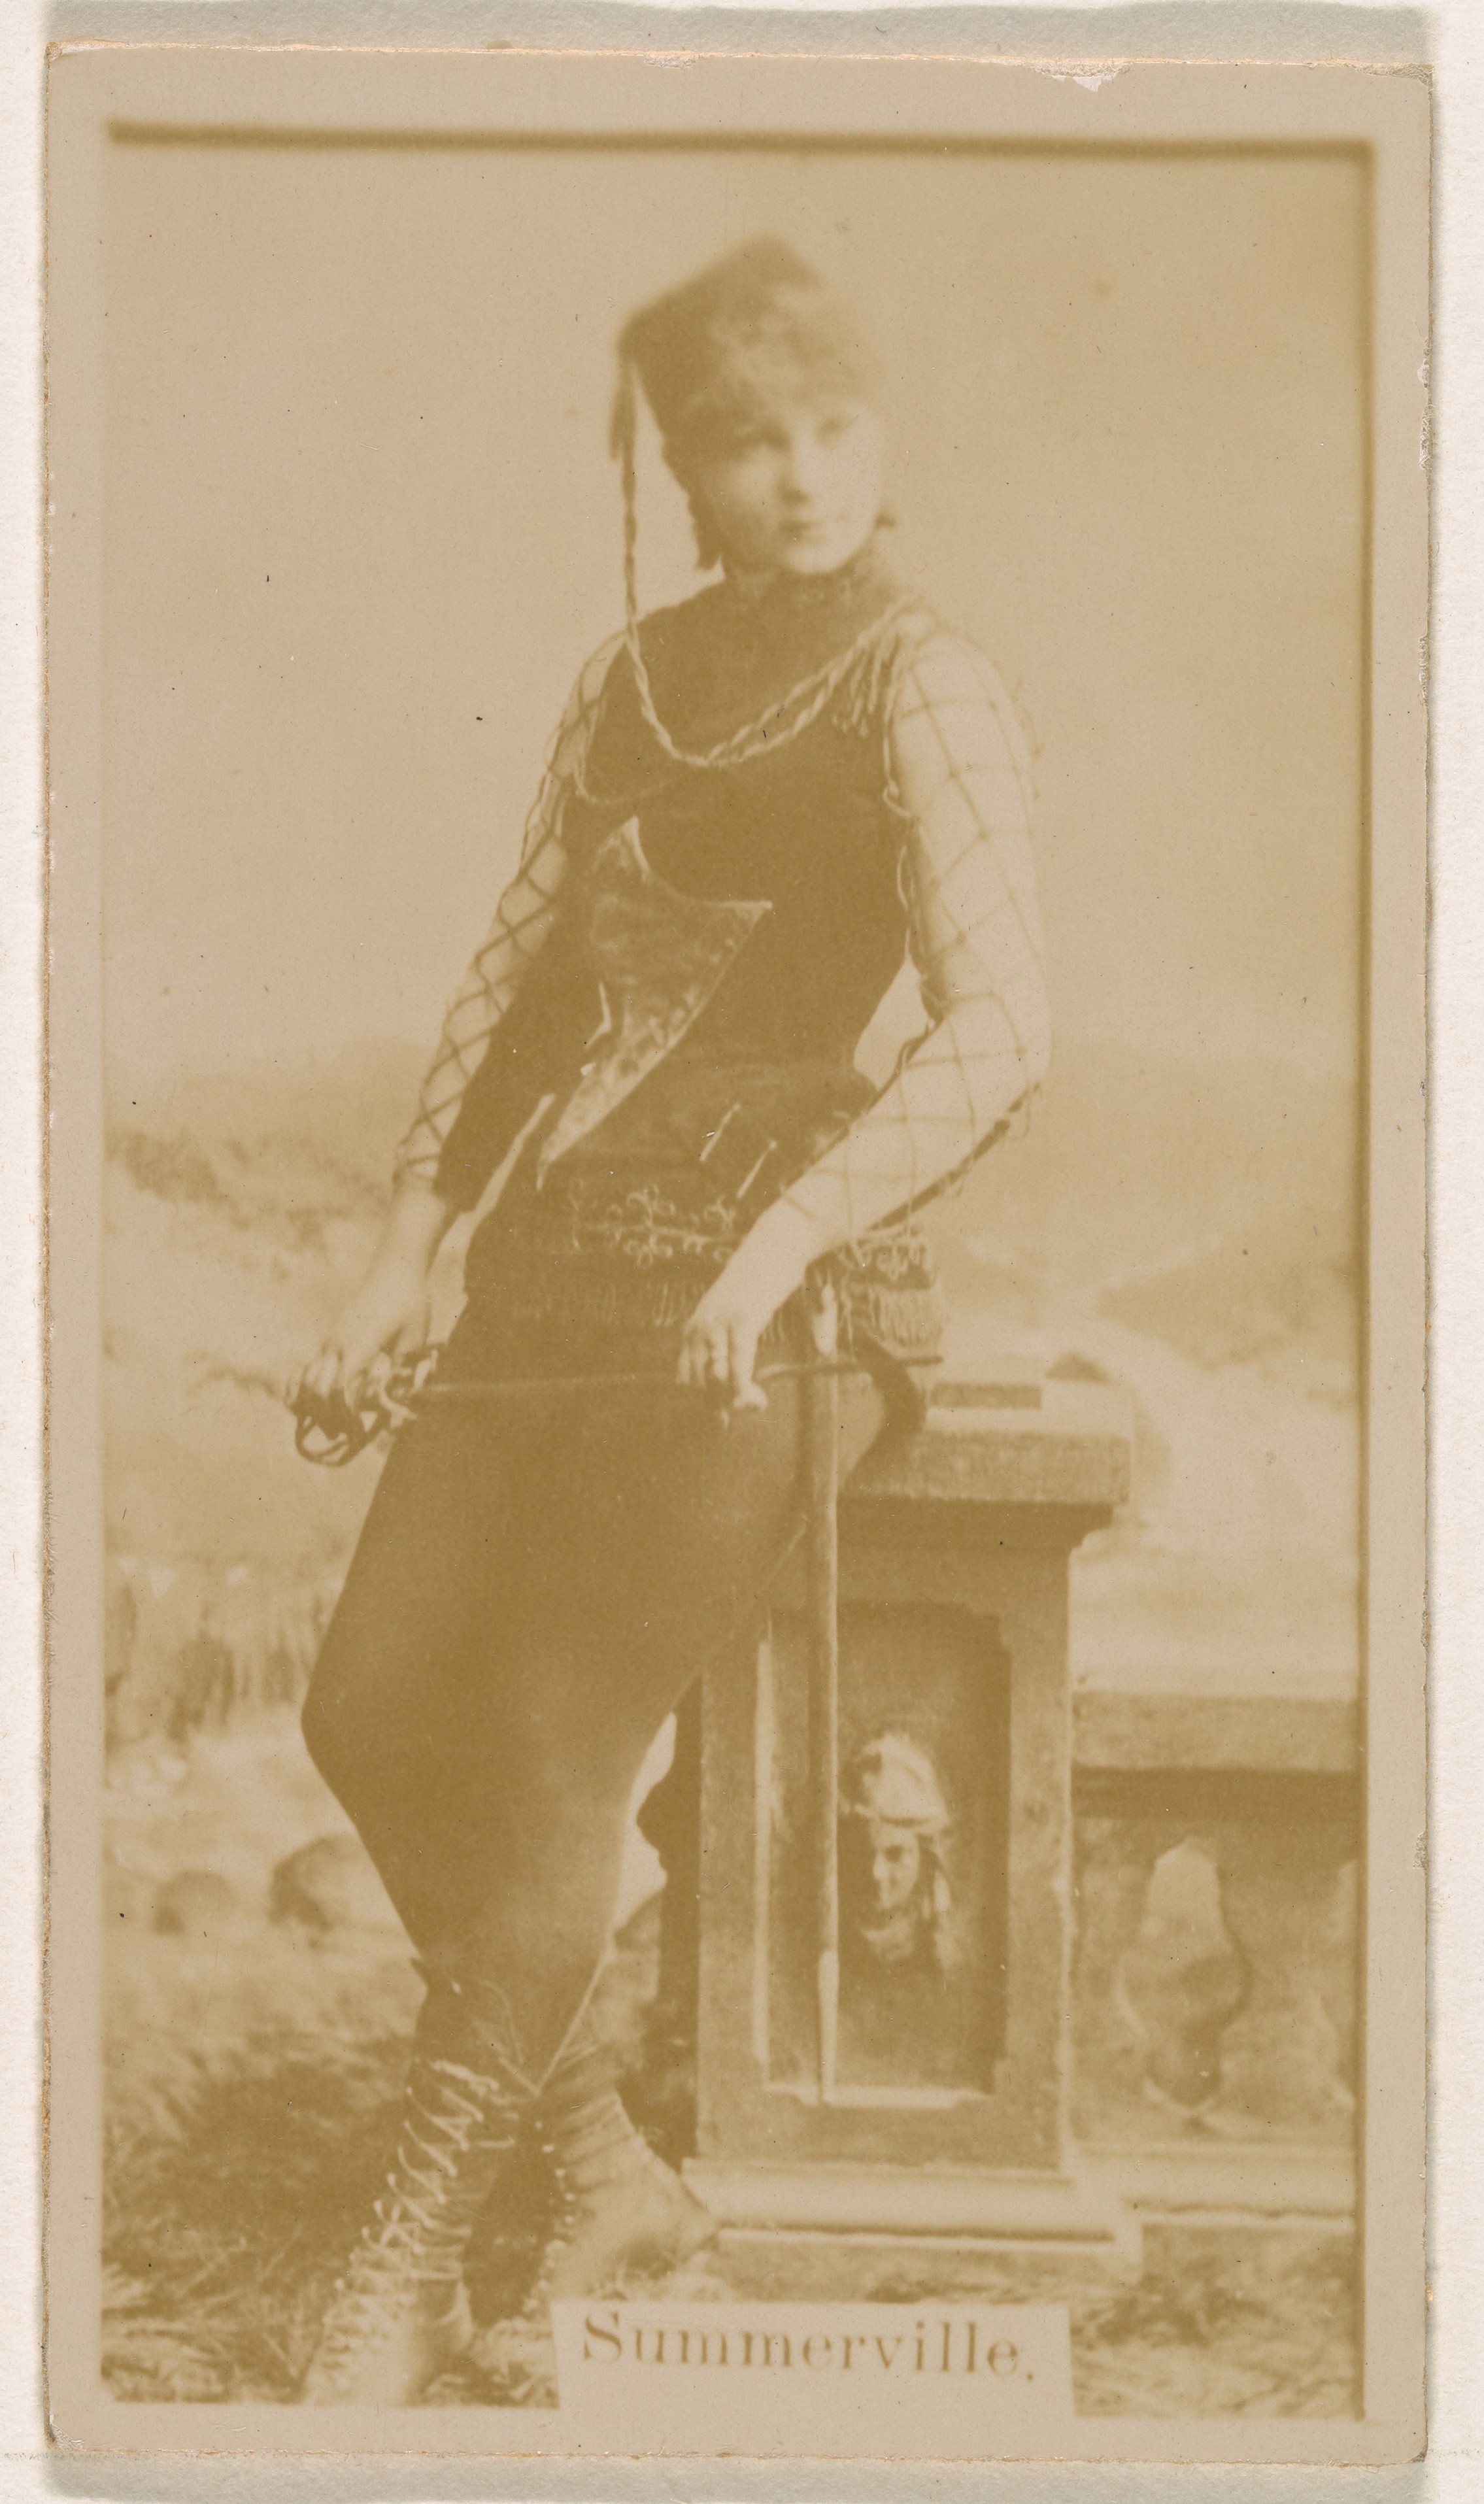 Issued By Kinney Brothers Tobacco Company Miss Annie Summerville From The Actresses Series